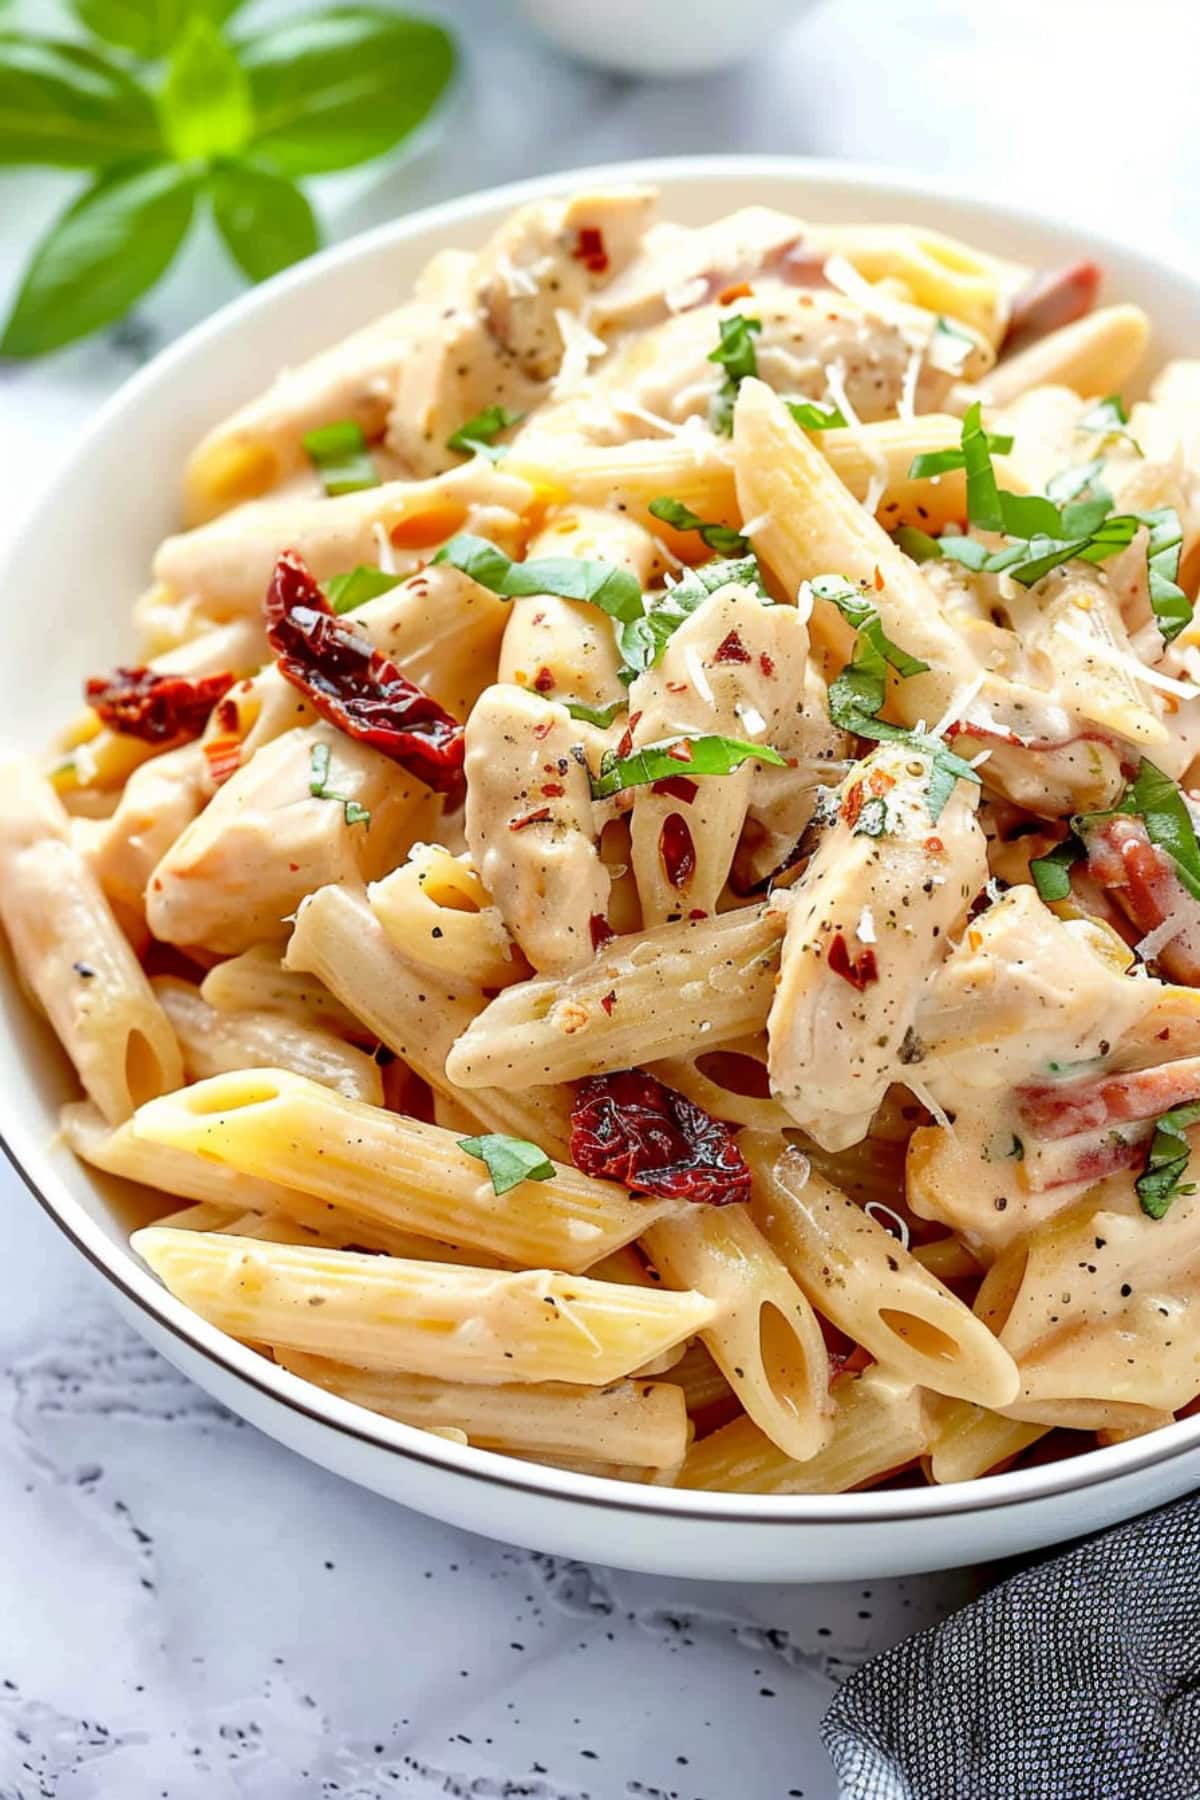 Penne pasta with heavy creamy sauce mixed with skinless chicken breasts, cut into bite-sized pieces, sun-dried tomatoes, grated Parmesan cheese, red pepper flakes, chopped baby spinach garnished with fresh basil leaves served on a white plate.